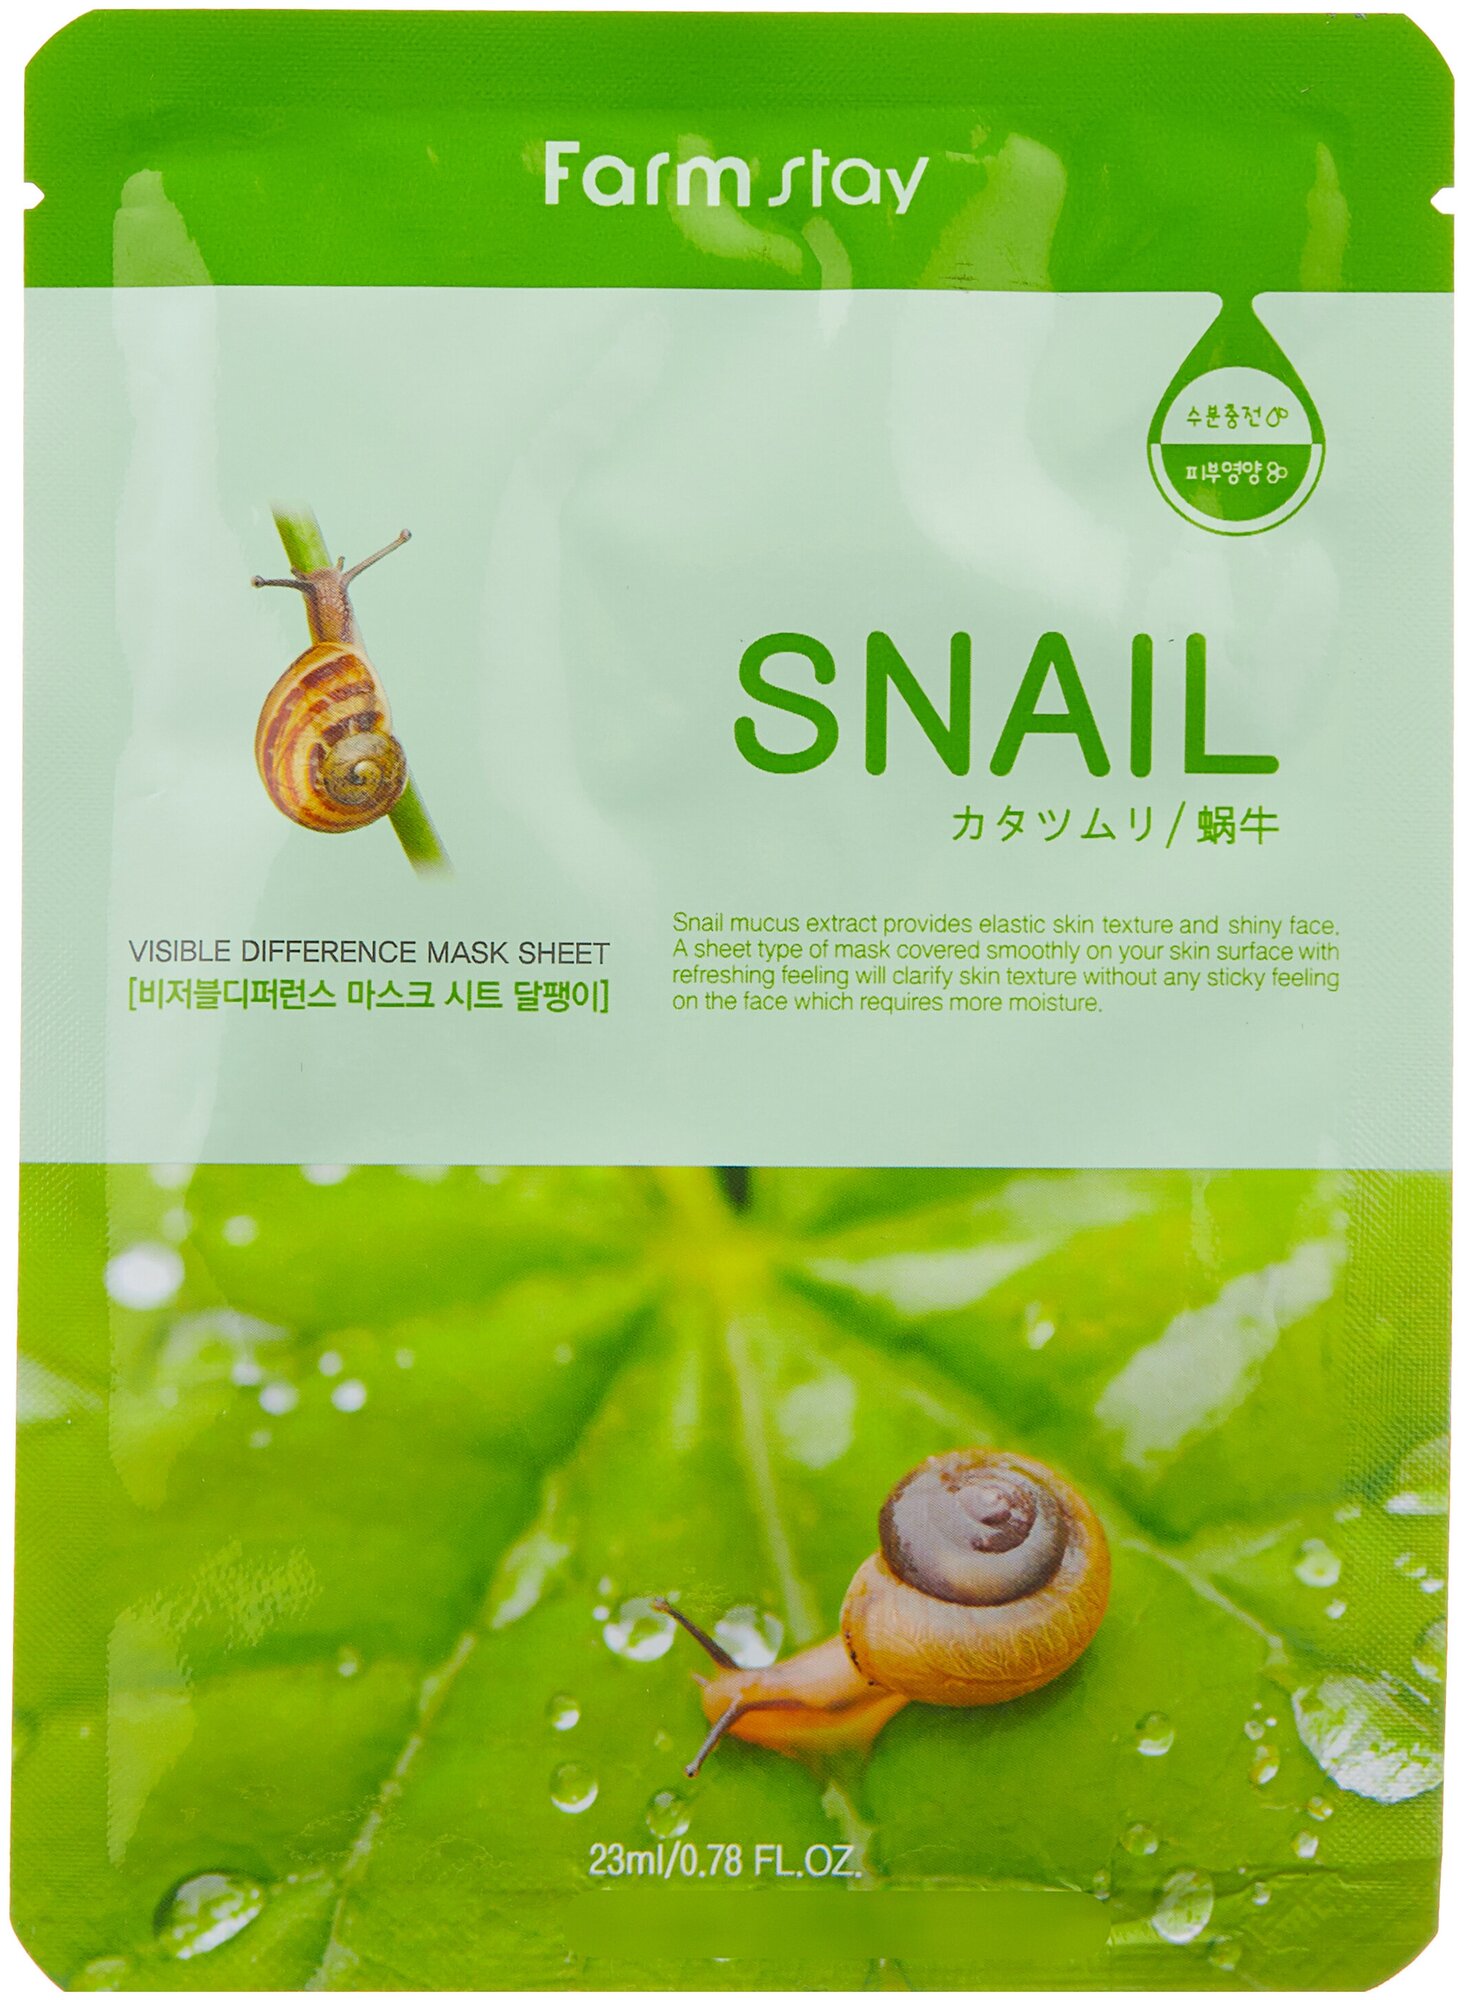 Farmstay Visible Difference Mask Sheet Snail с экстрактом улитки